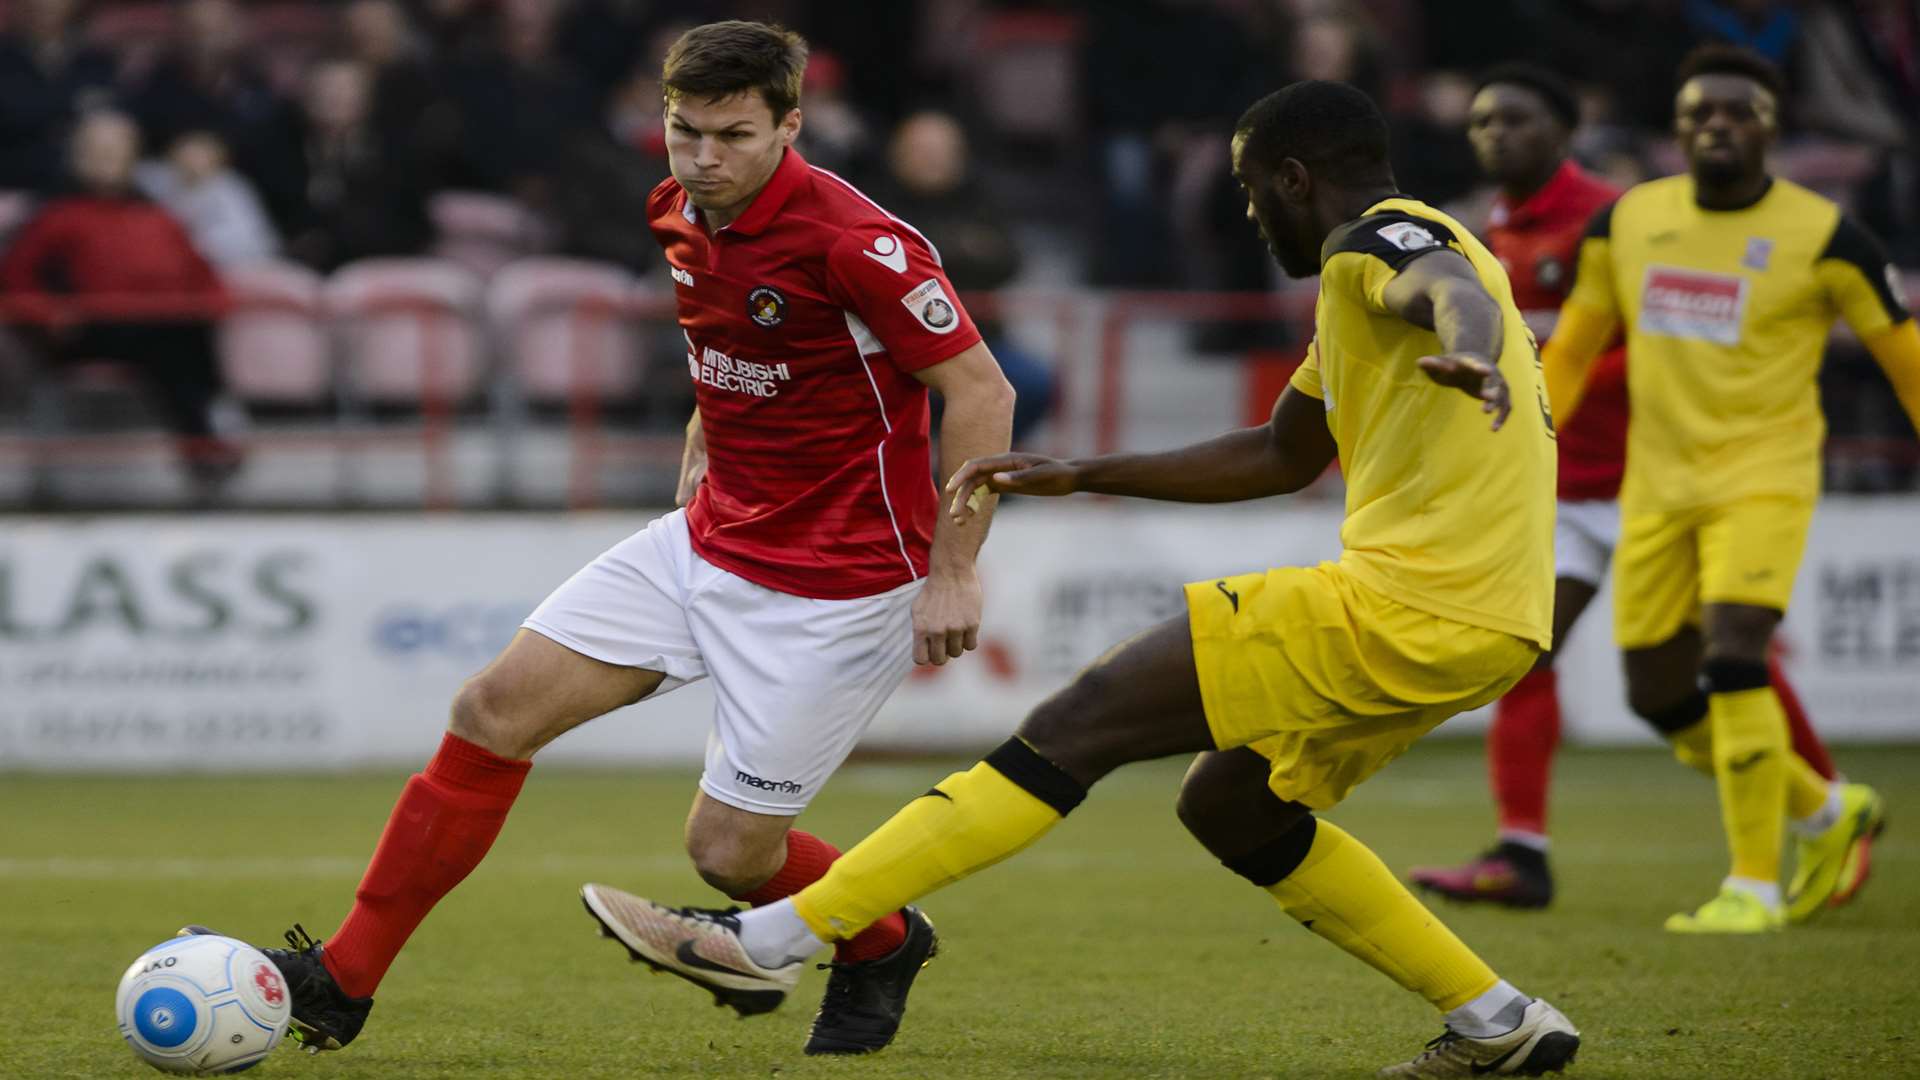 Charlie Sheringham on the ball for Ebbsfleet Picture: Andy Payton